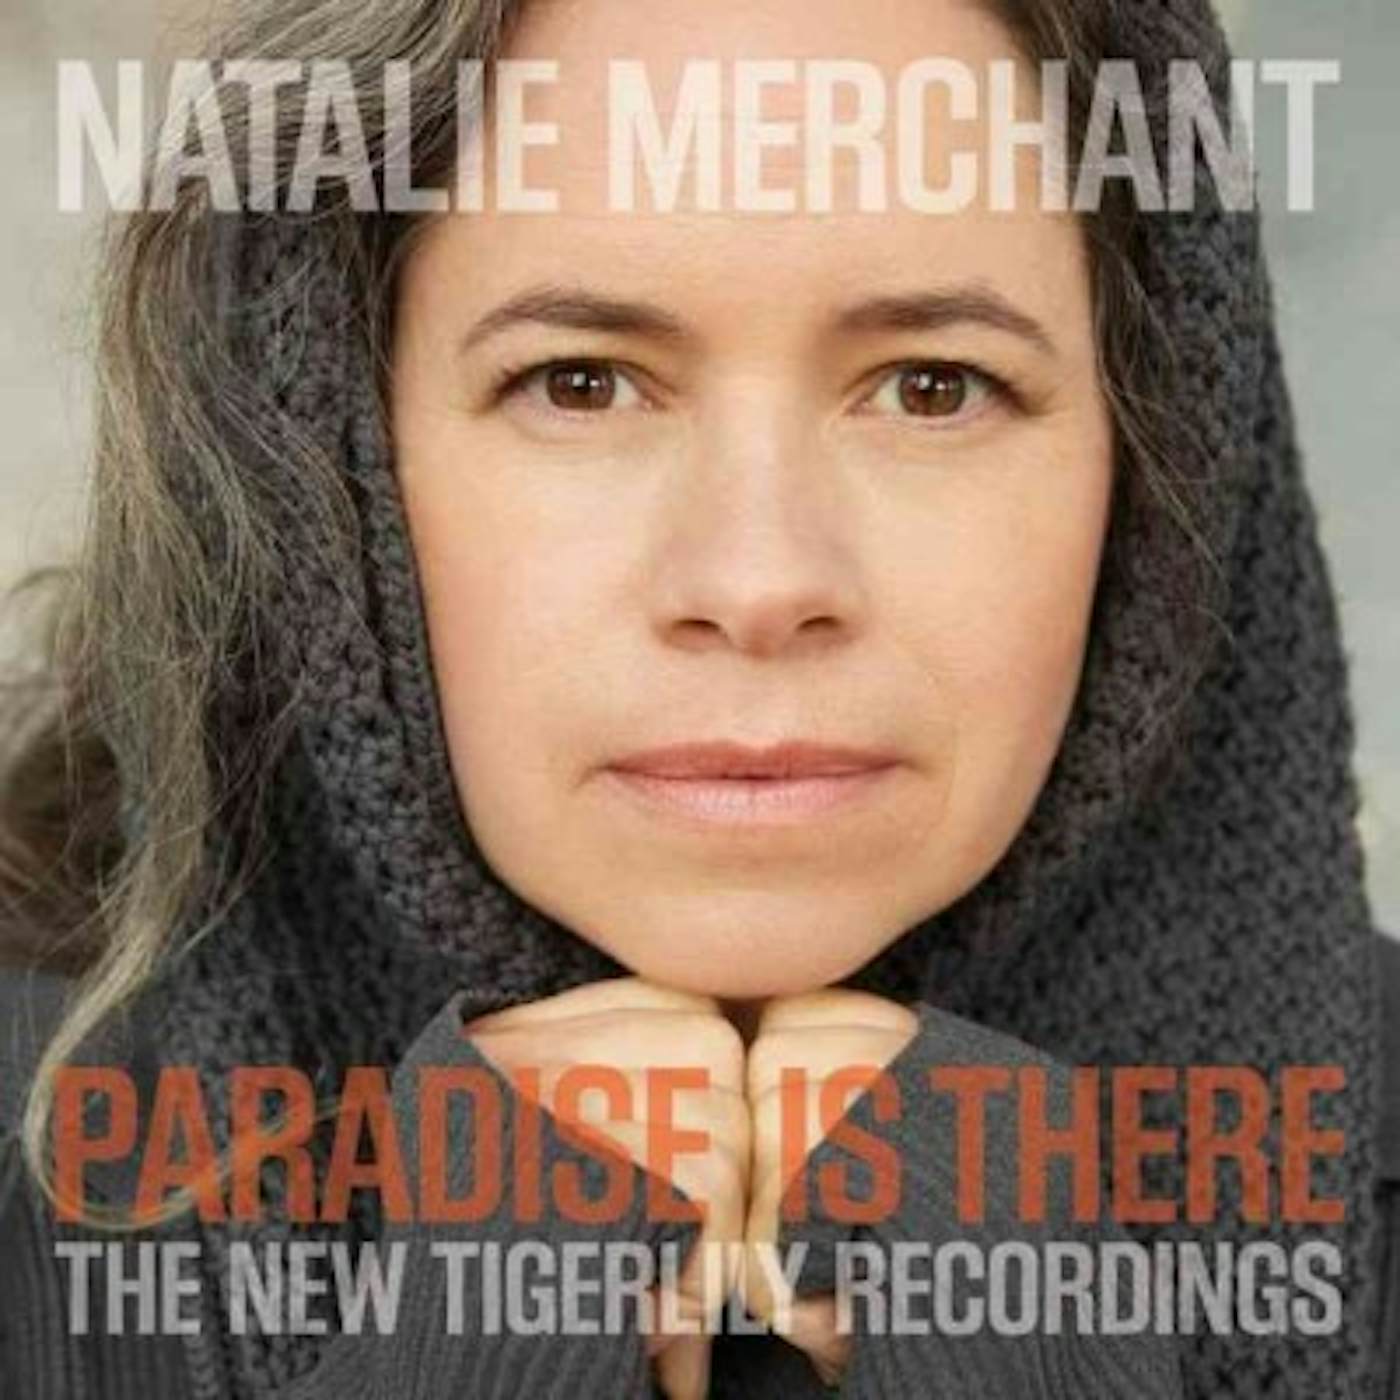 Natalie Merchant Paradise is There: The New Tigerlily Recordings CD